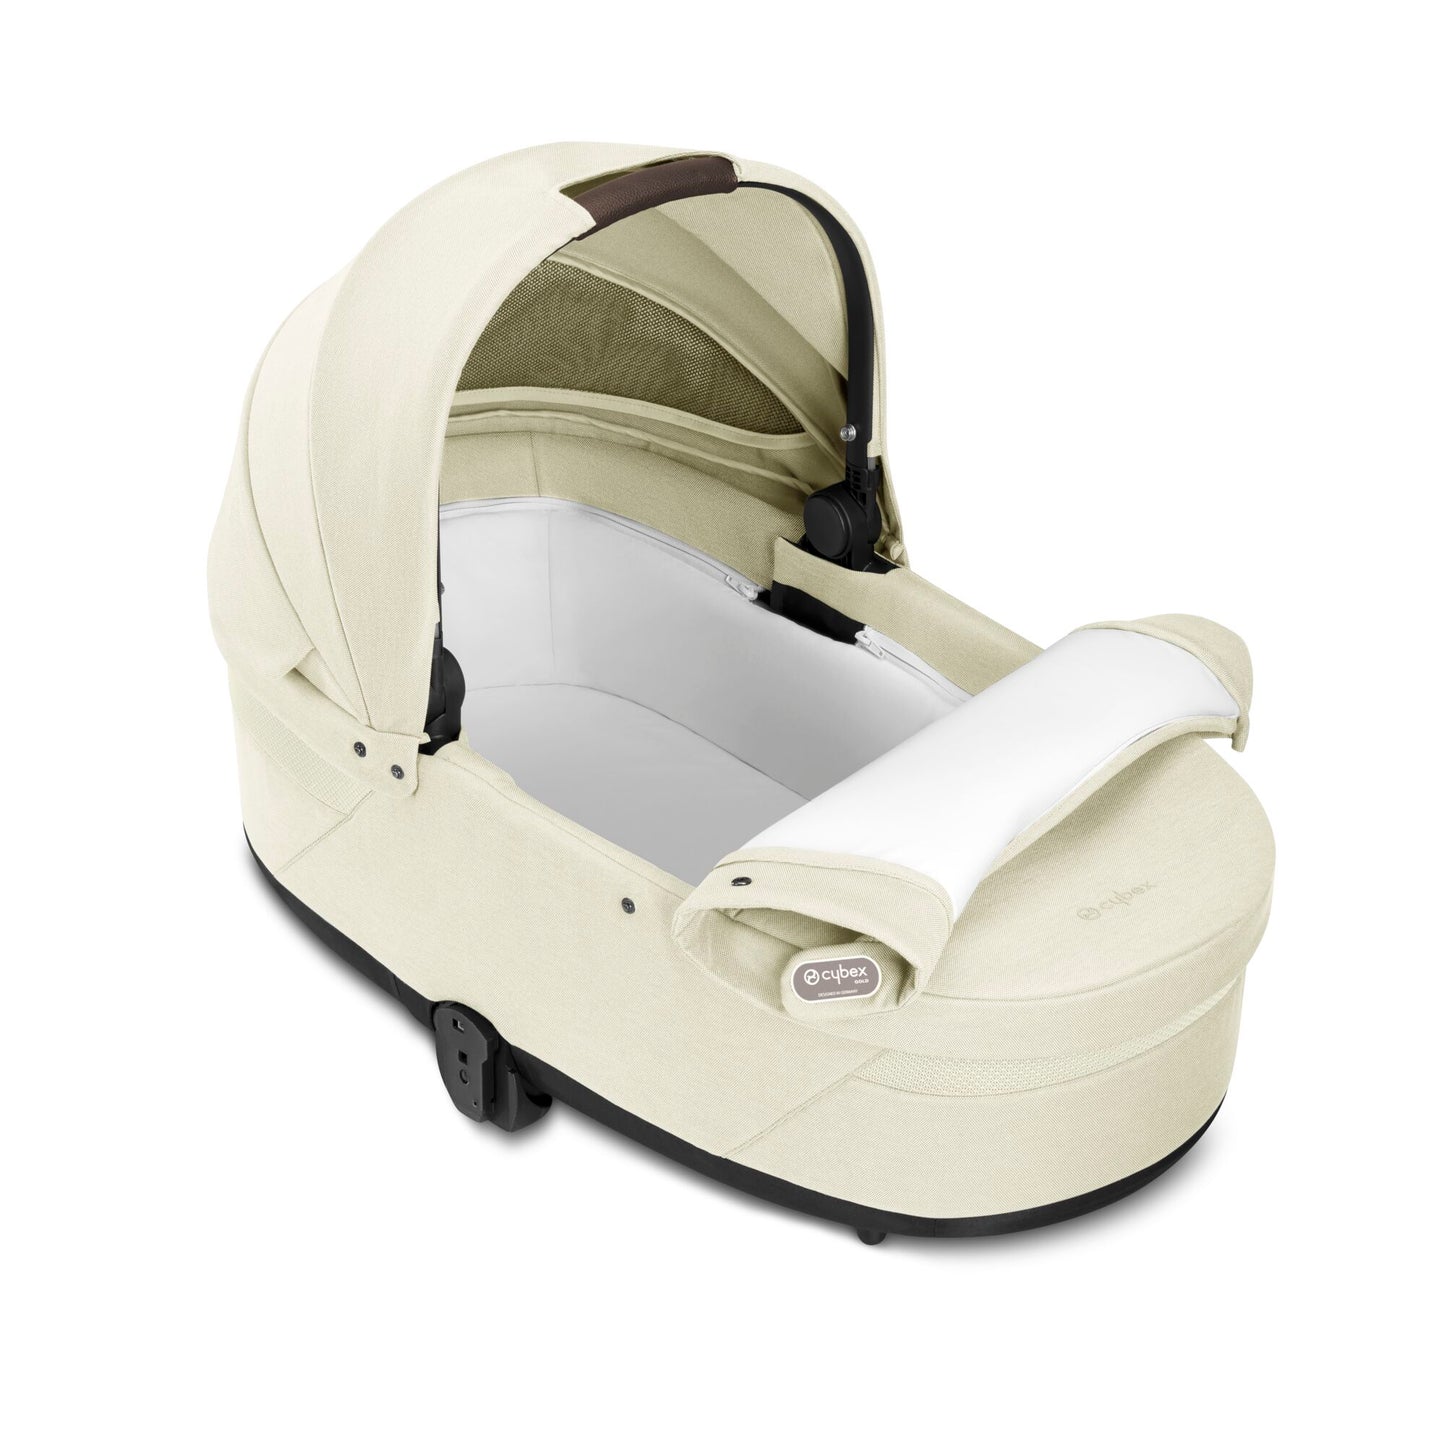 Cybex COT S LUX Carrycot Seashell Beige